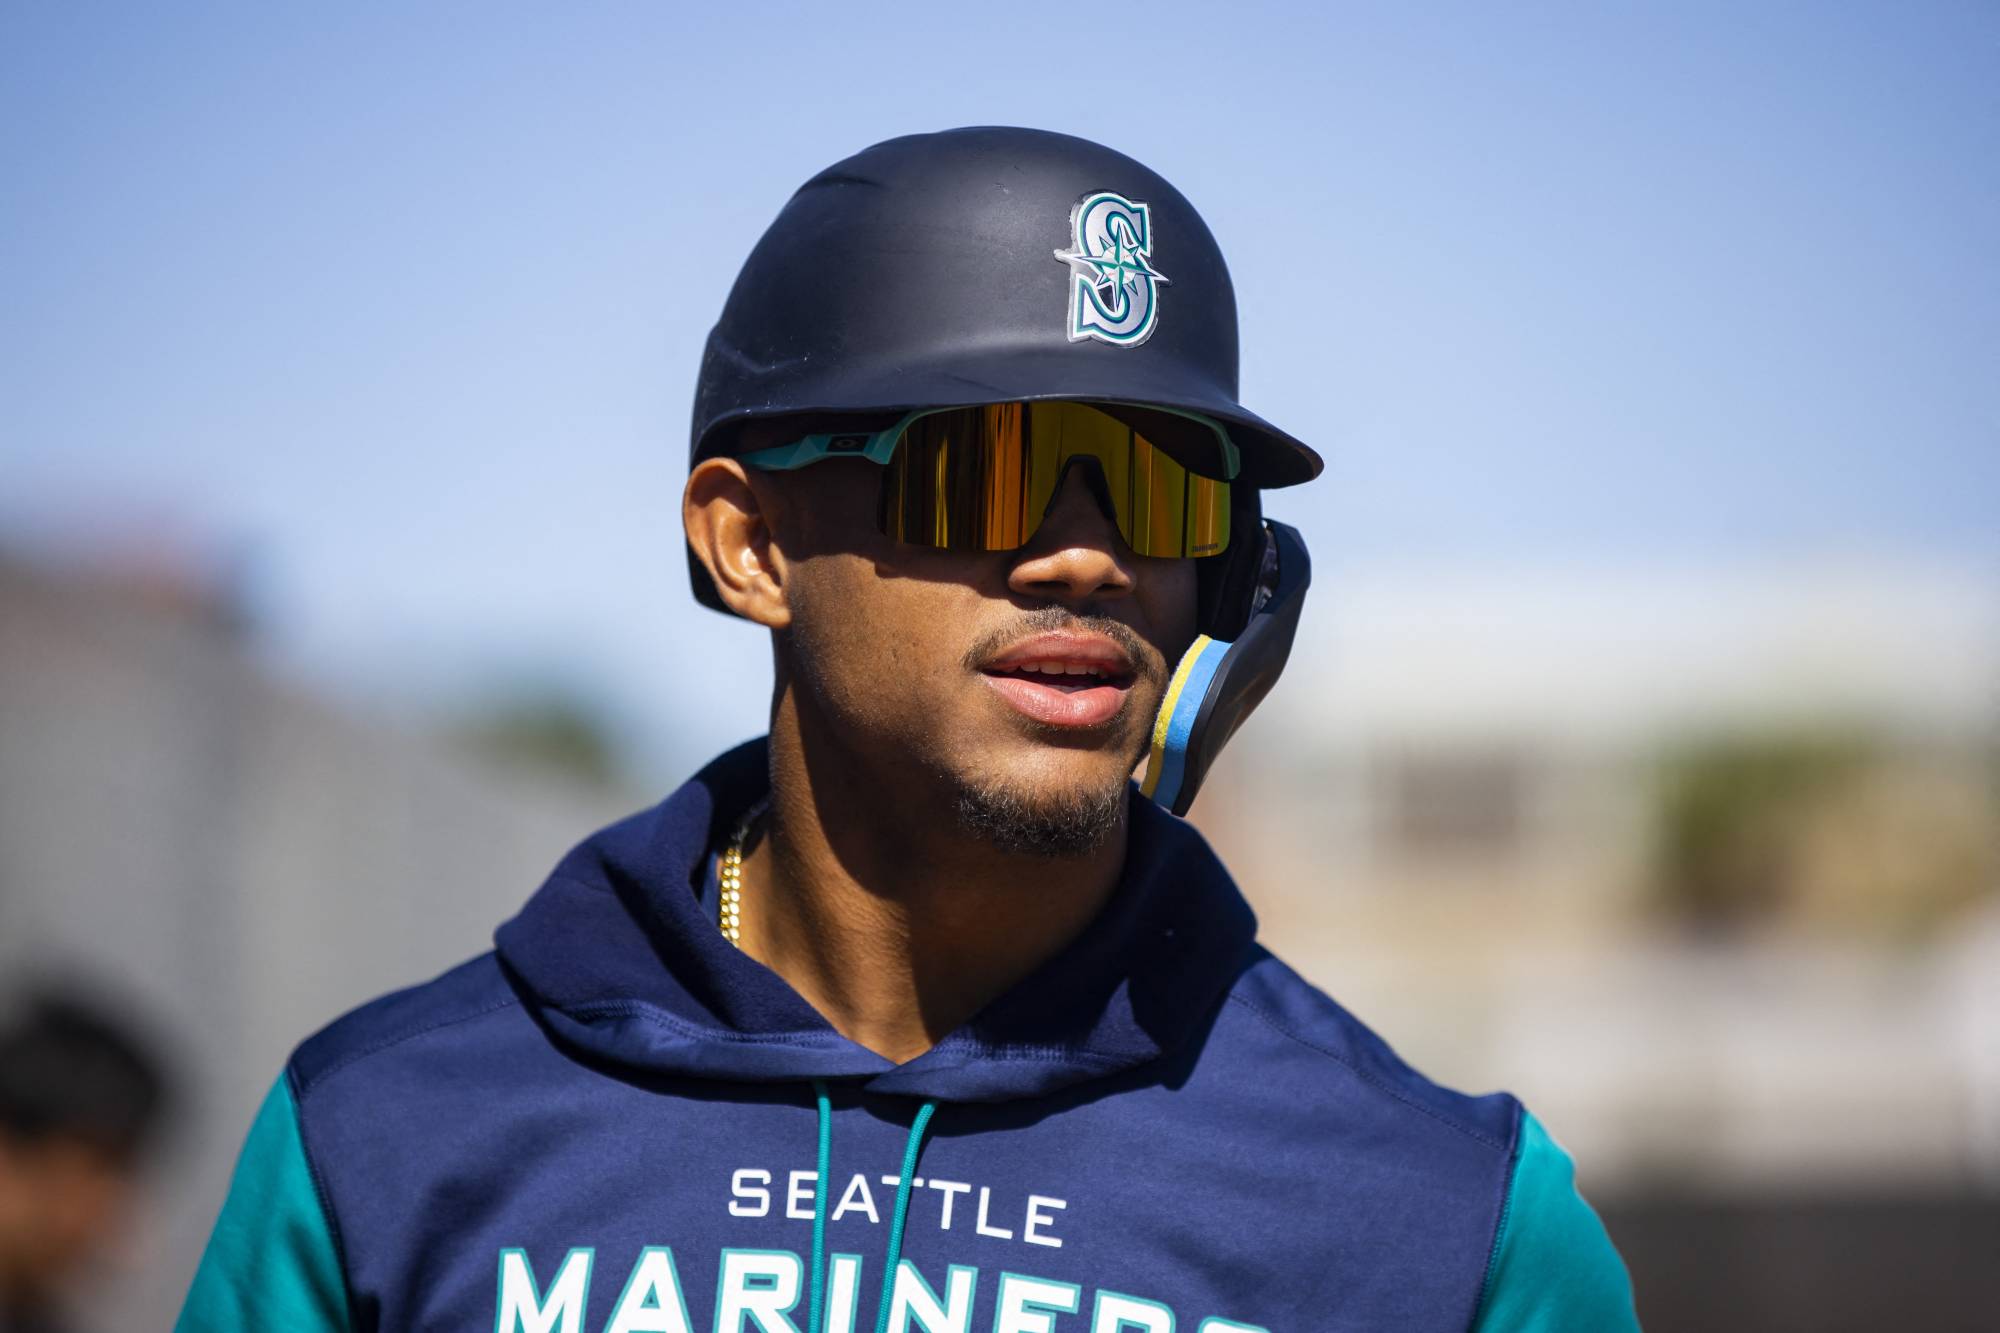 Seattle Mariners outfielder Julio Rodriguez during spring training workouts on March 17. | USA TODAY / VIA REUTERS